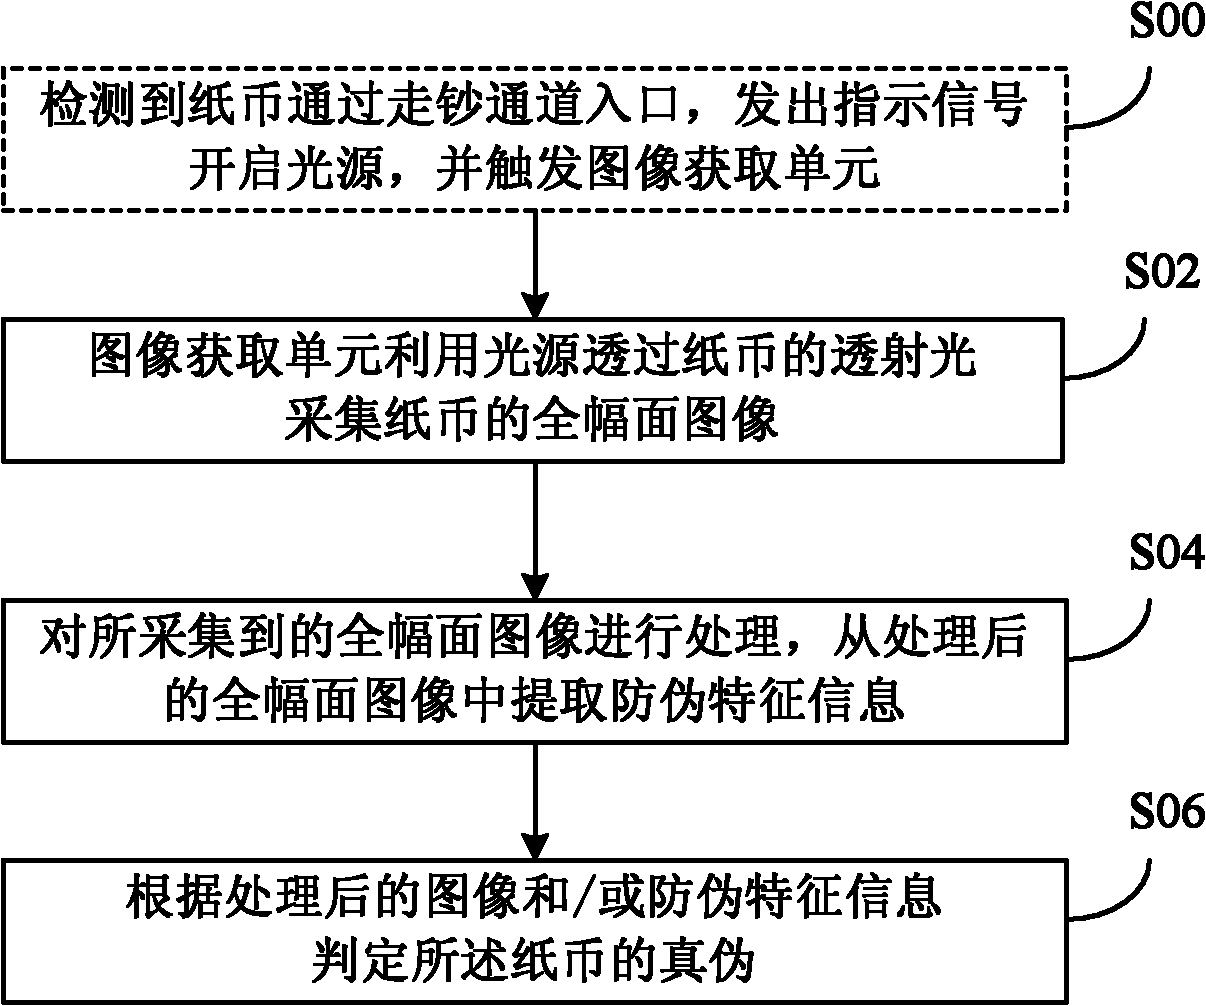 Paper currency detecting method and device